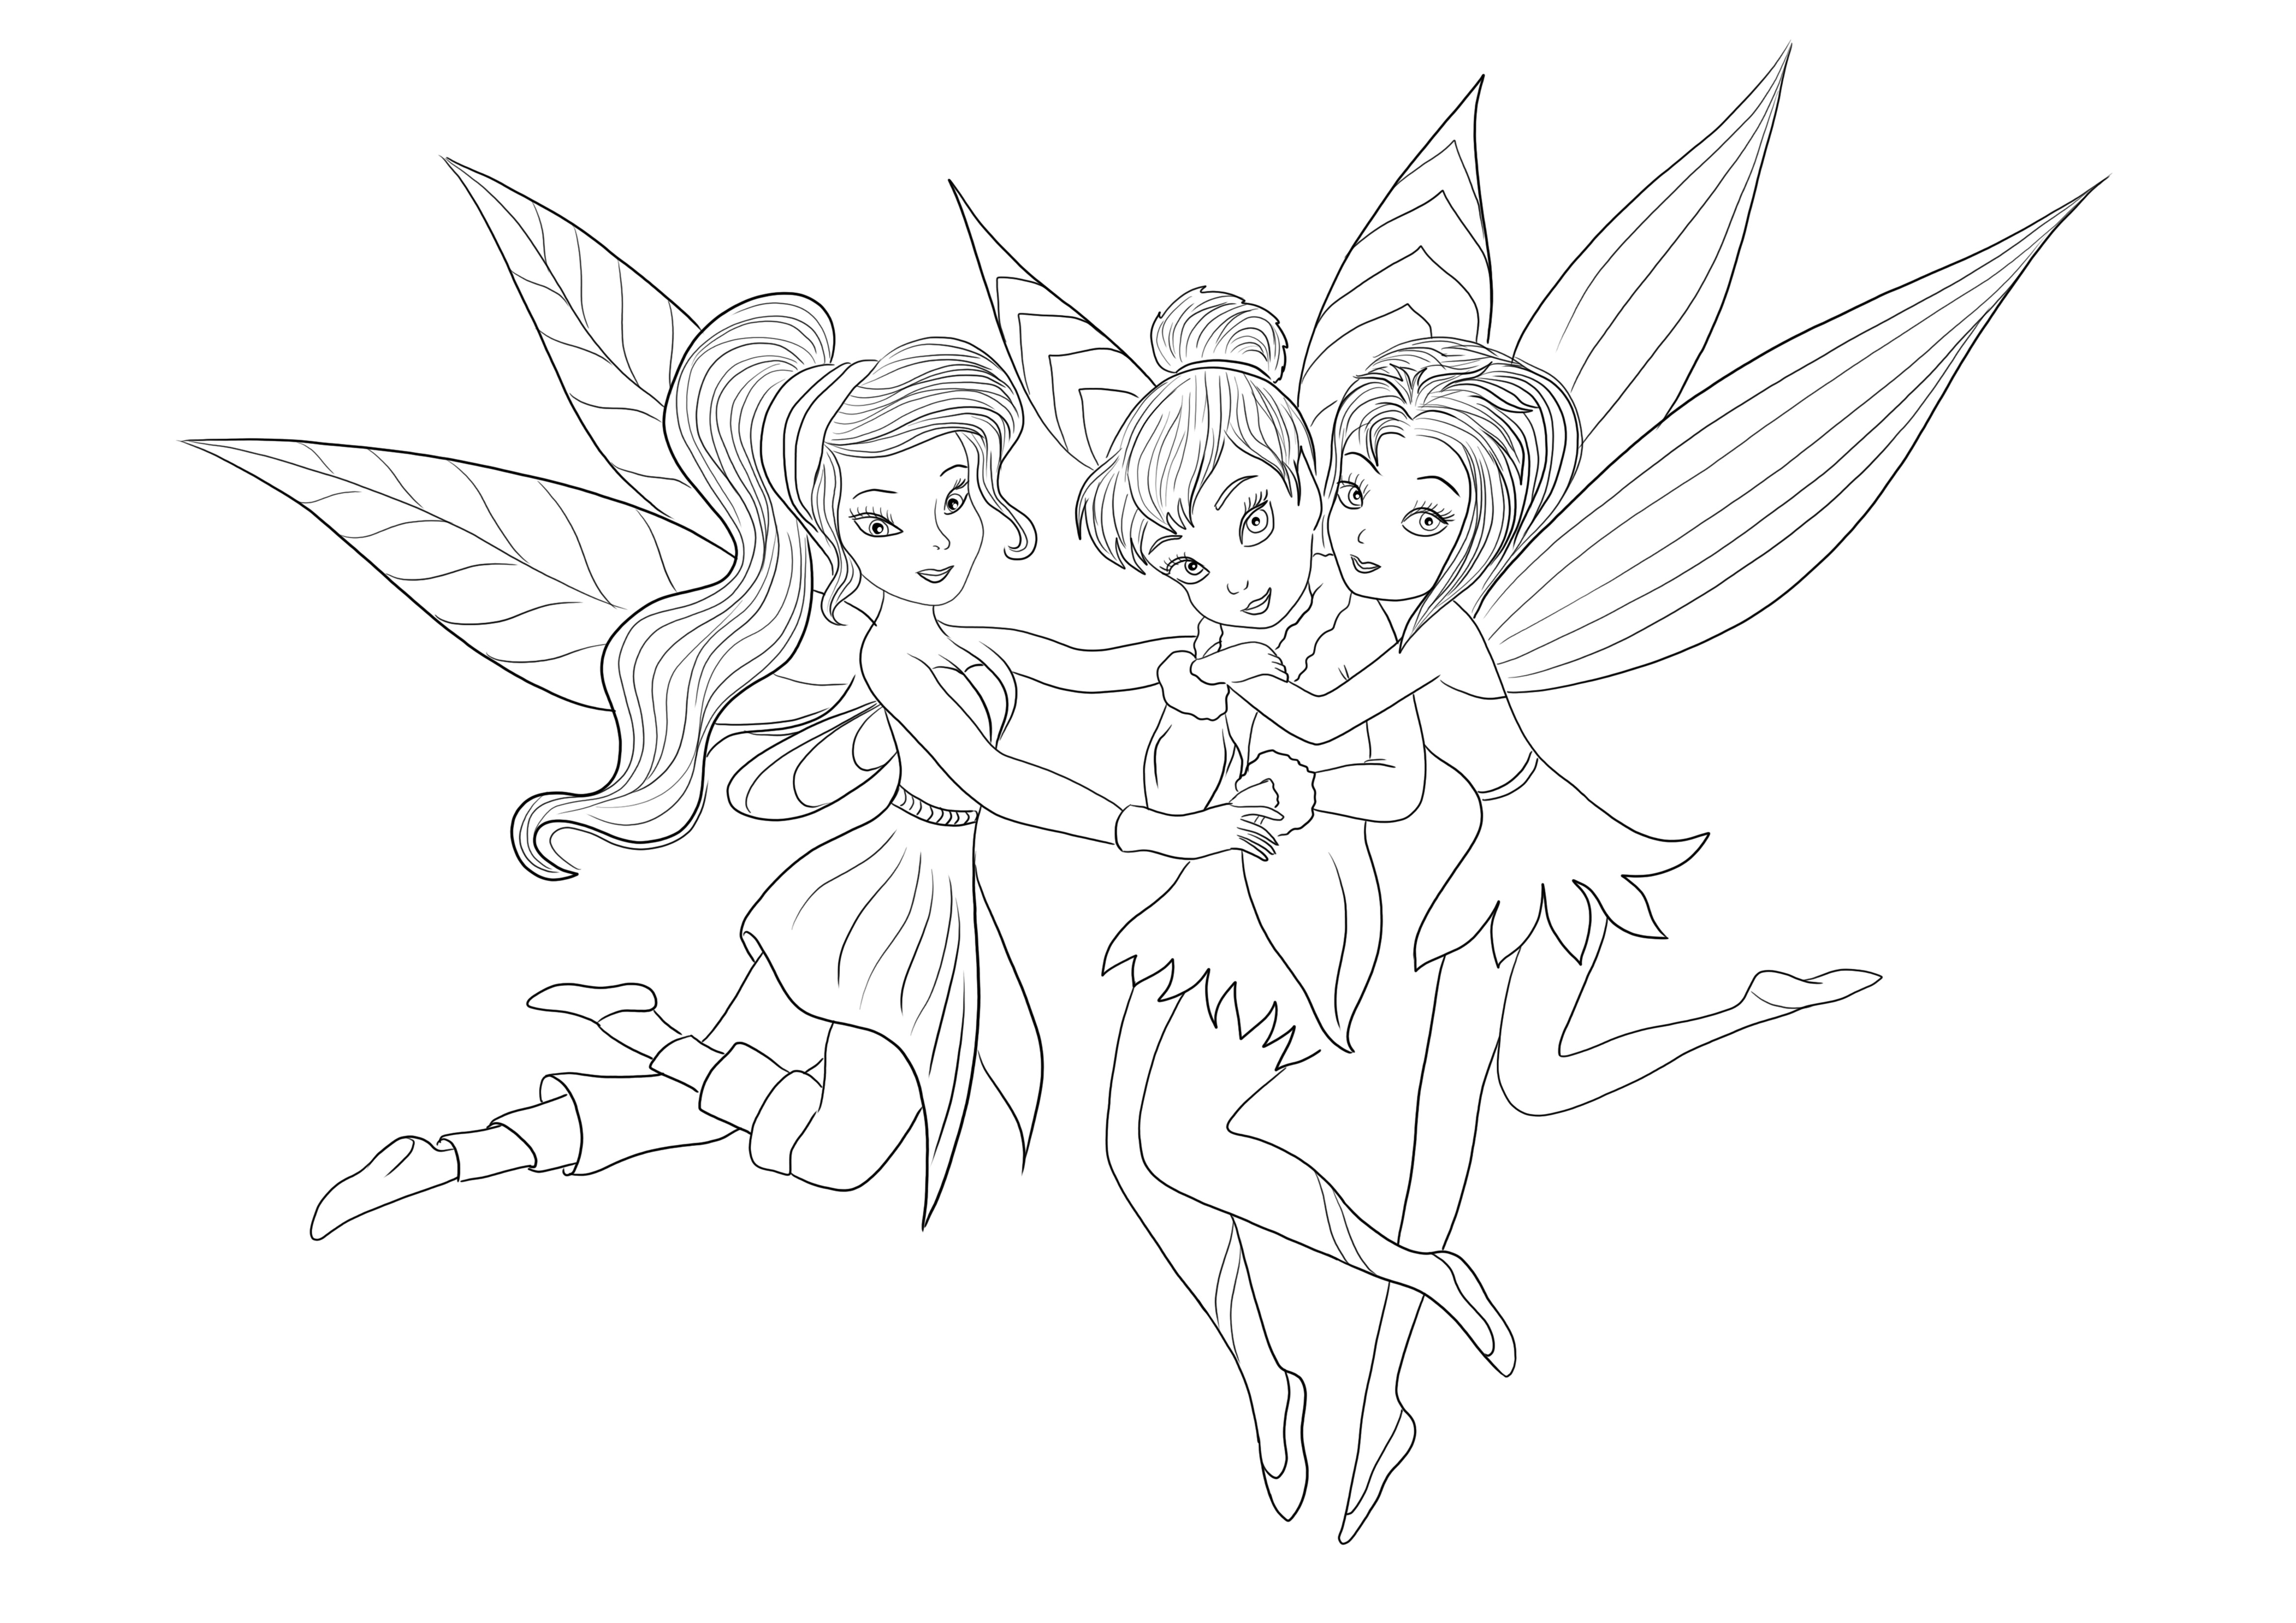 Tinkerbell With Friends free to print and color image for kids of all ages